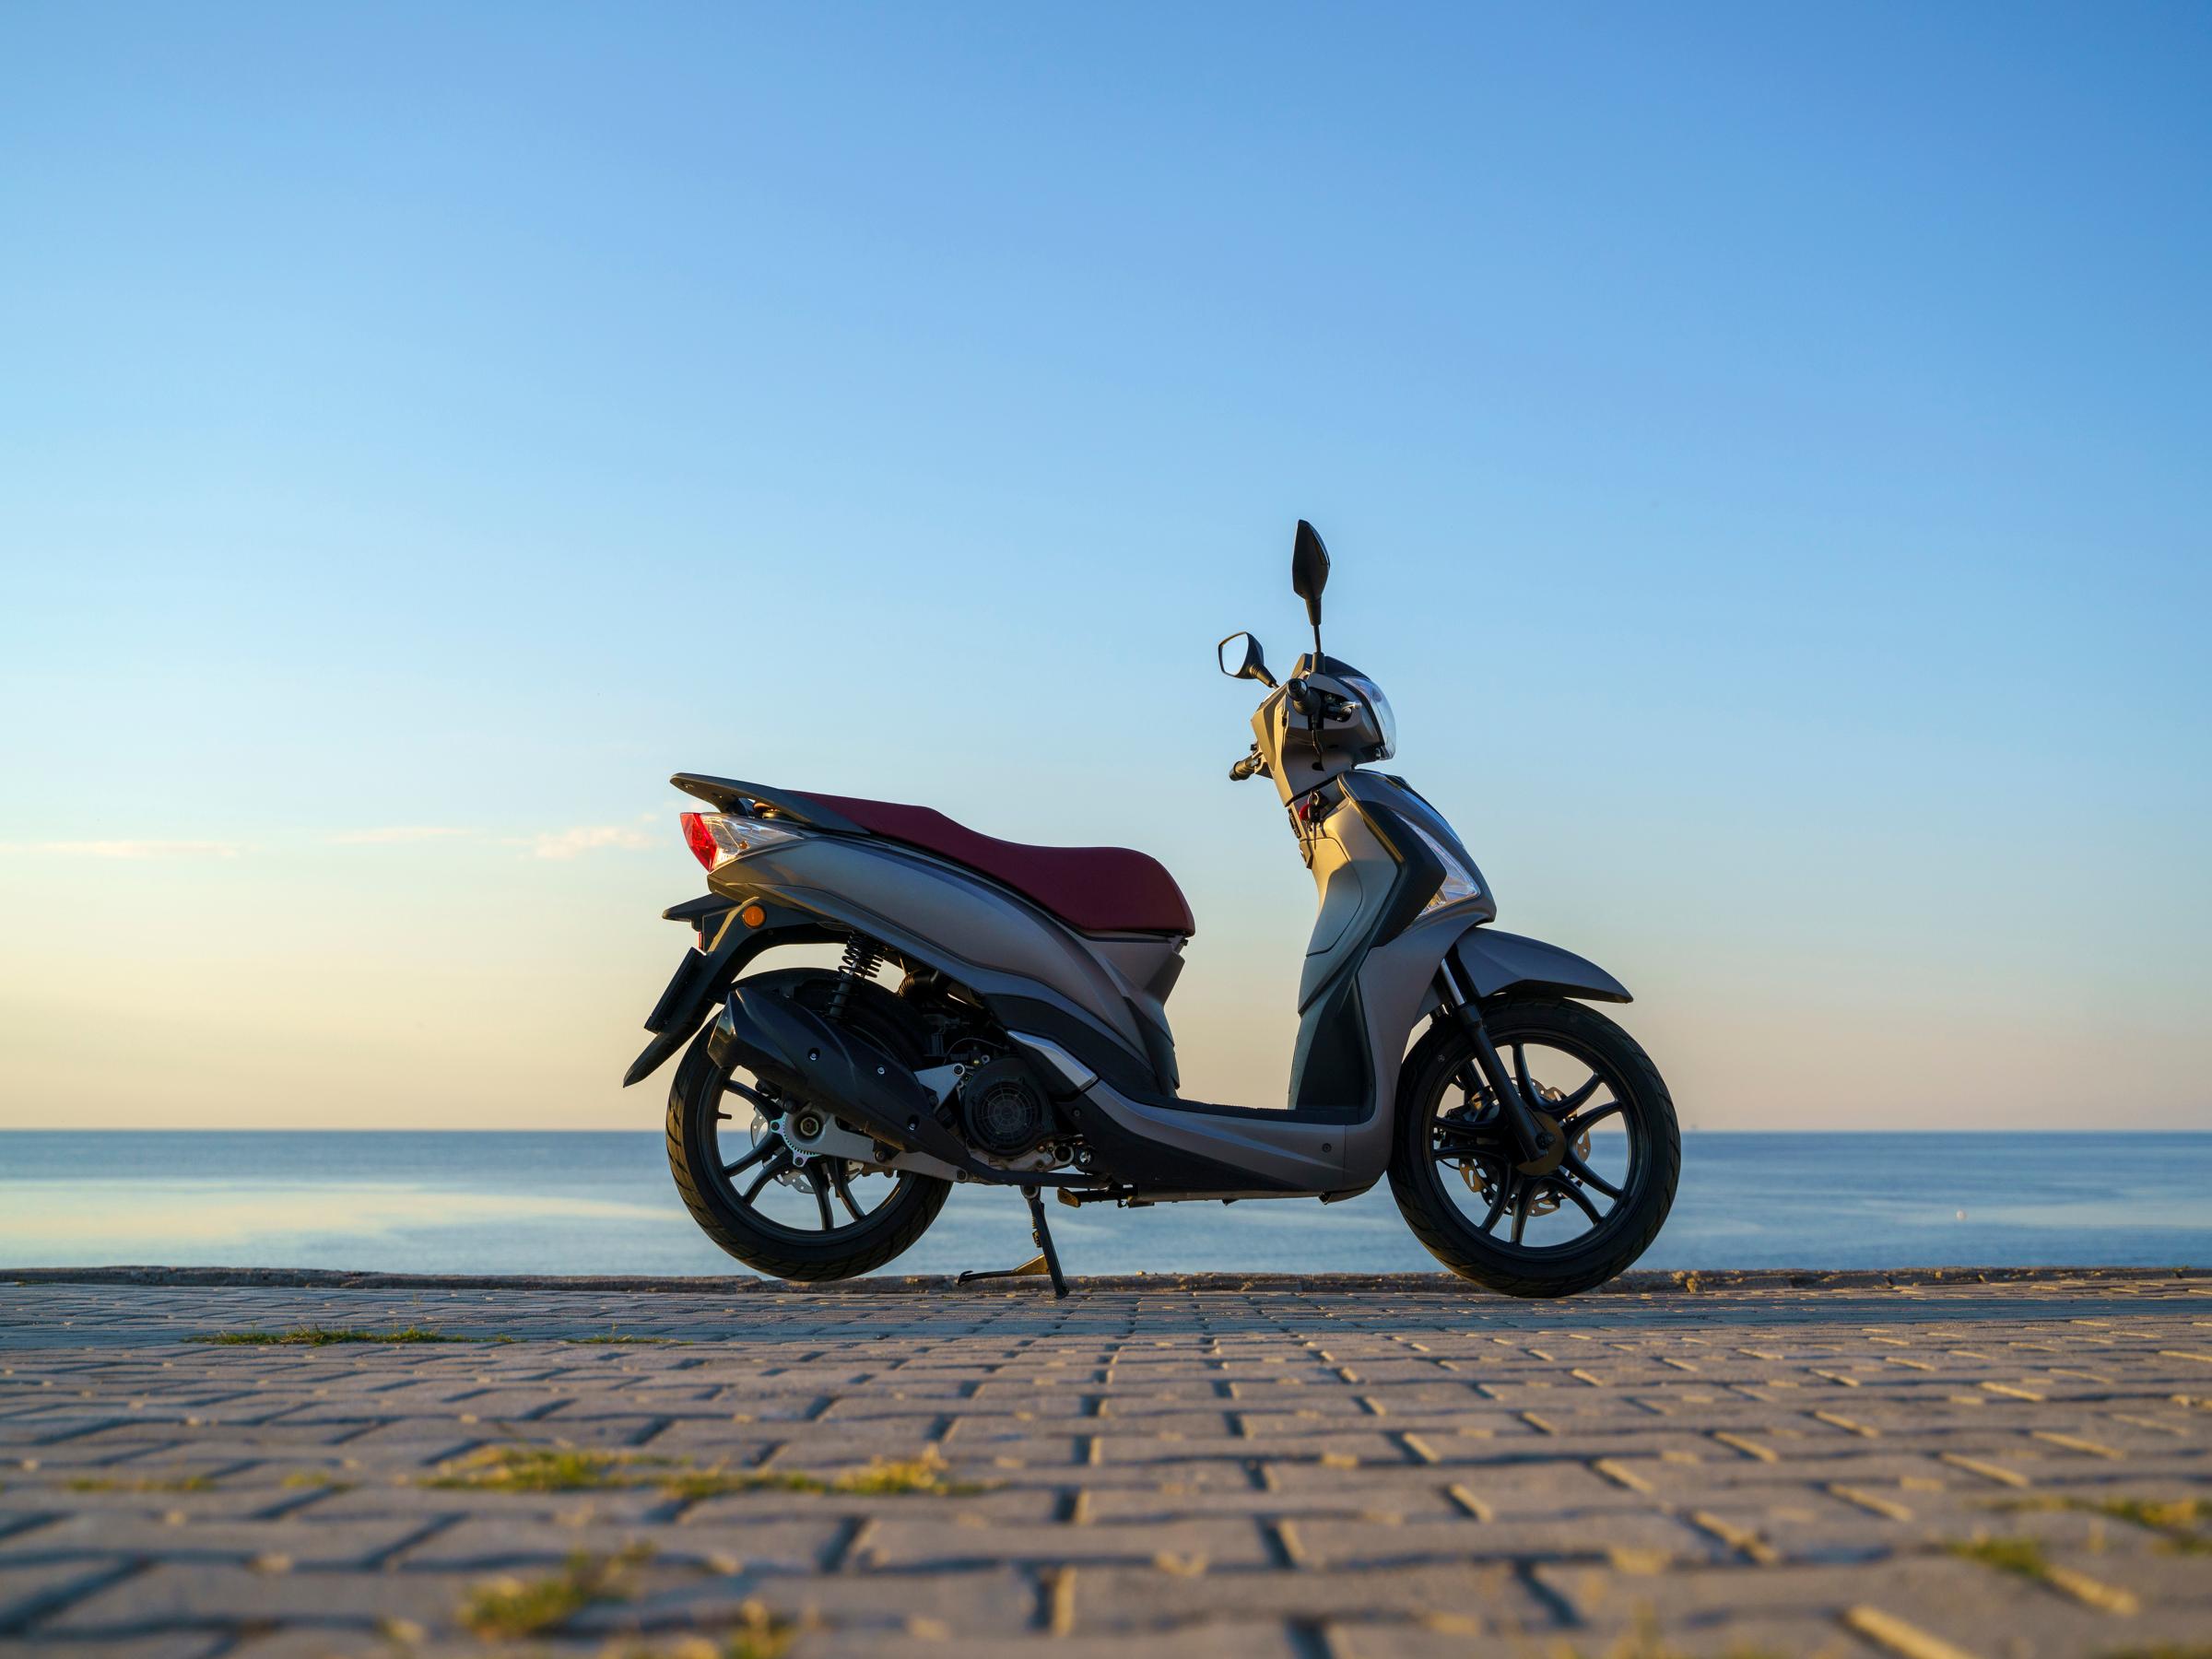 Moped insurance - get a quote online